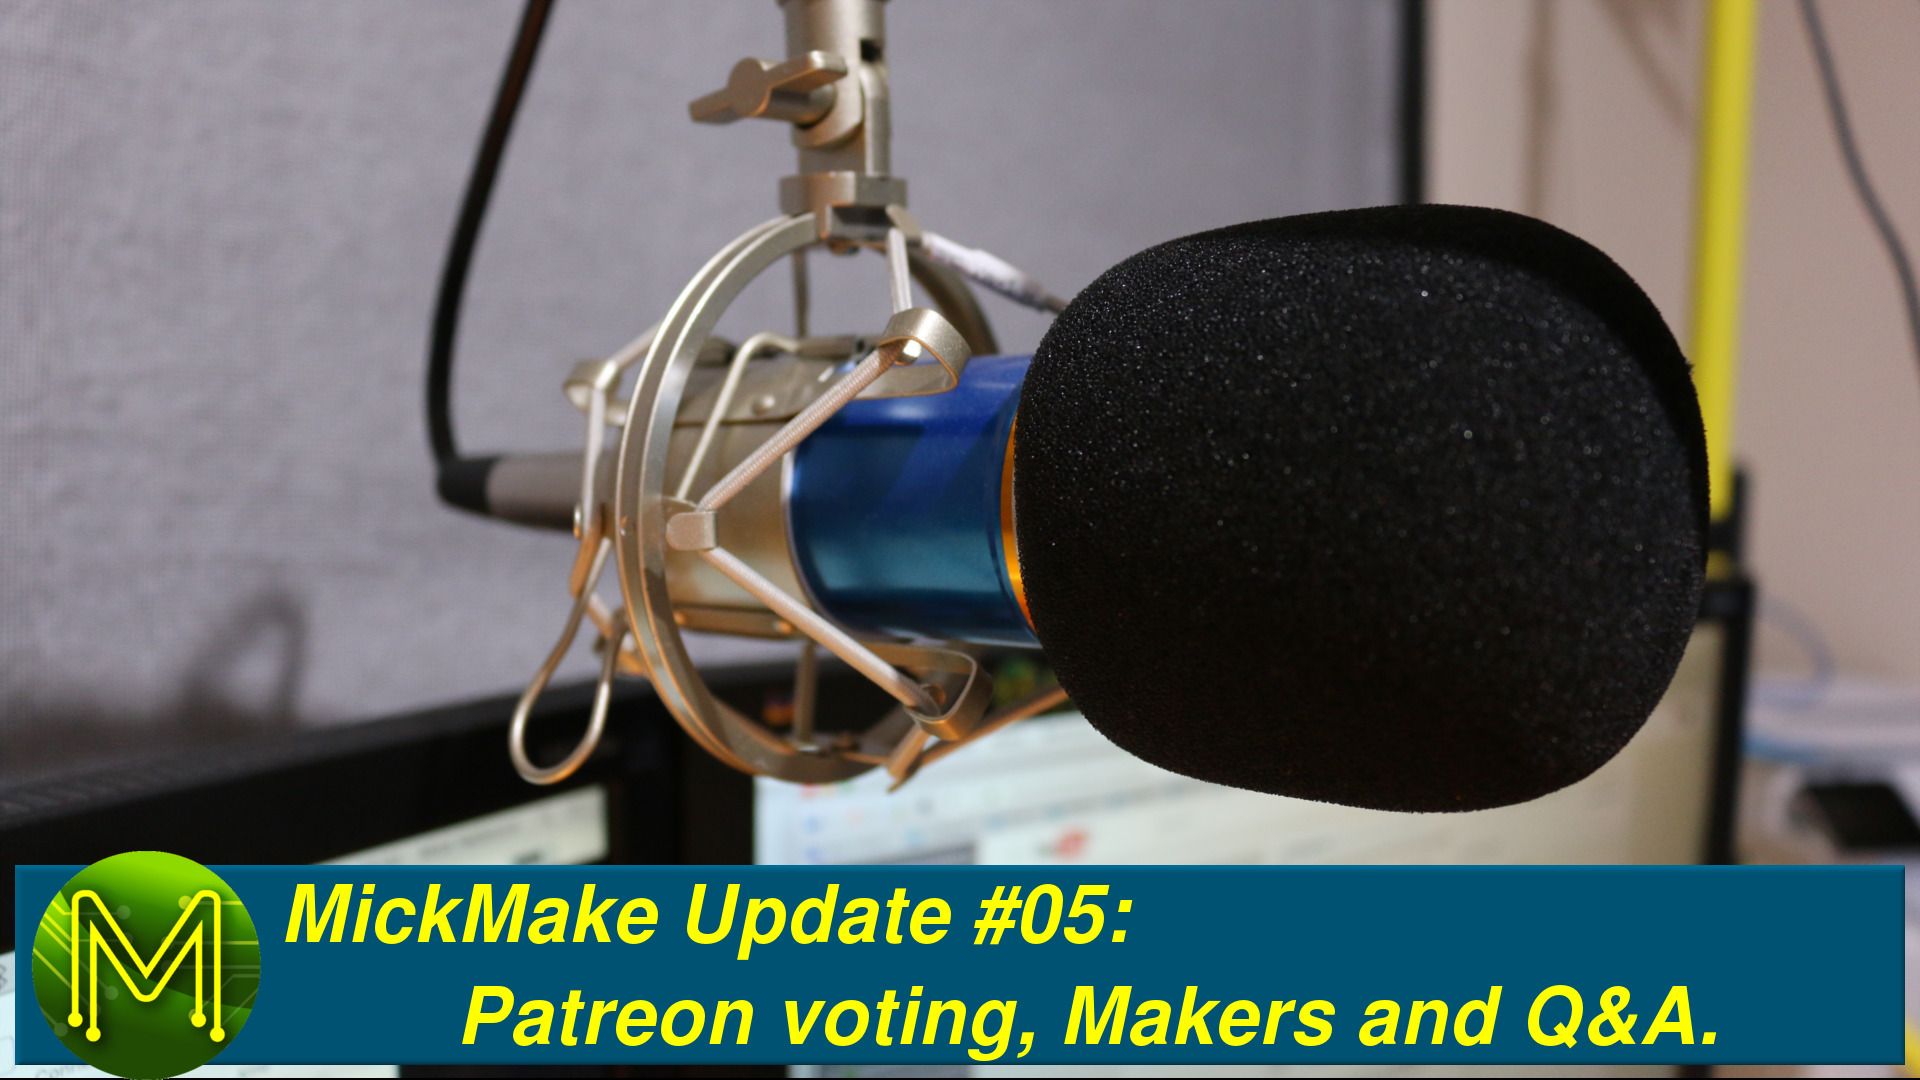 MickMake Update #05: Patreon voting, Makers and Q&A.